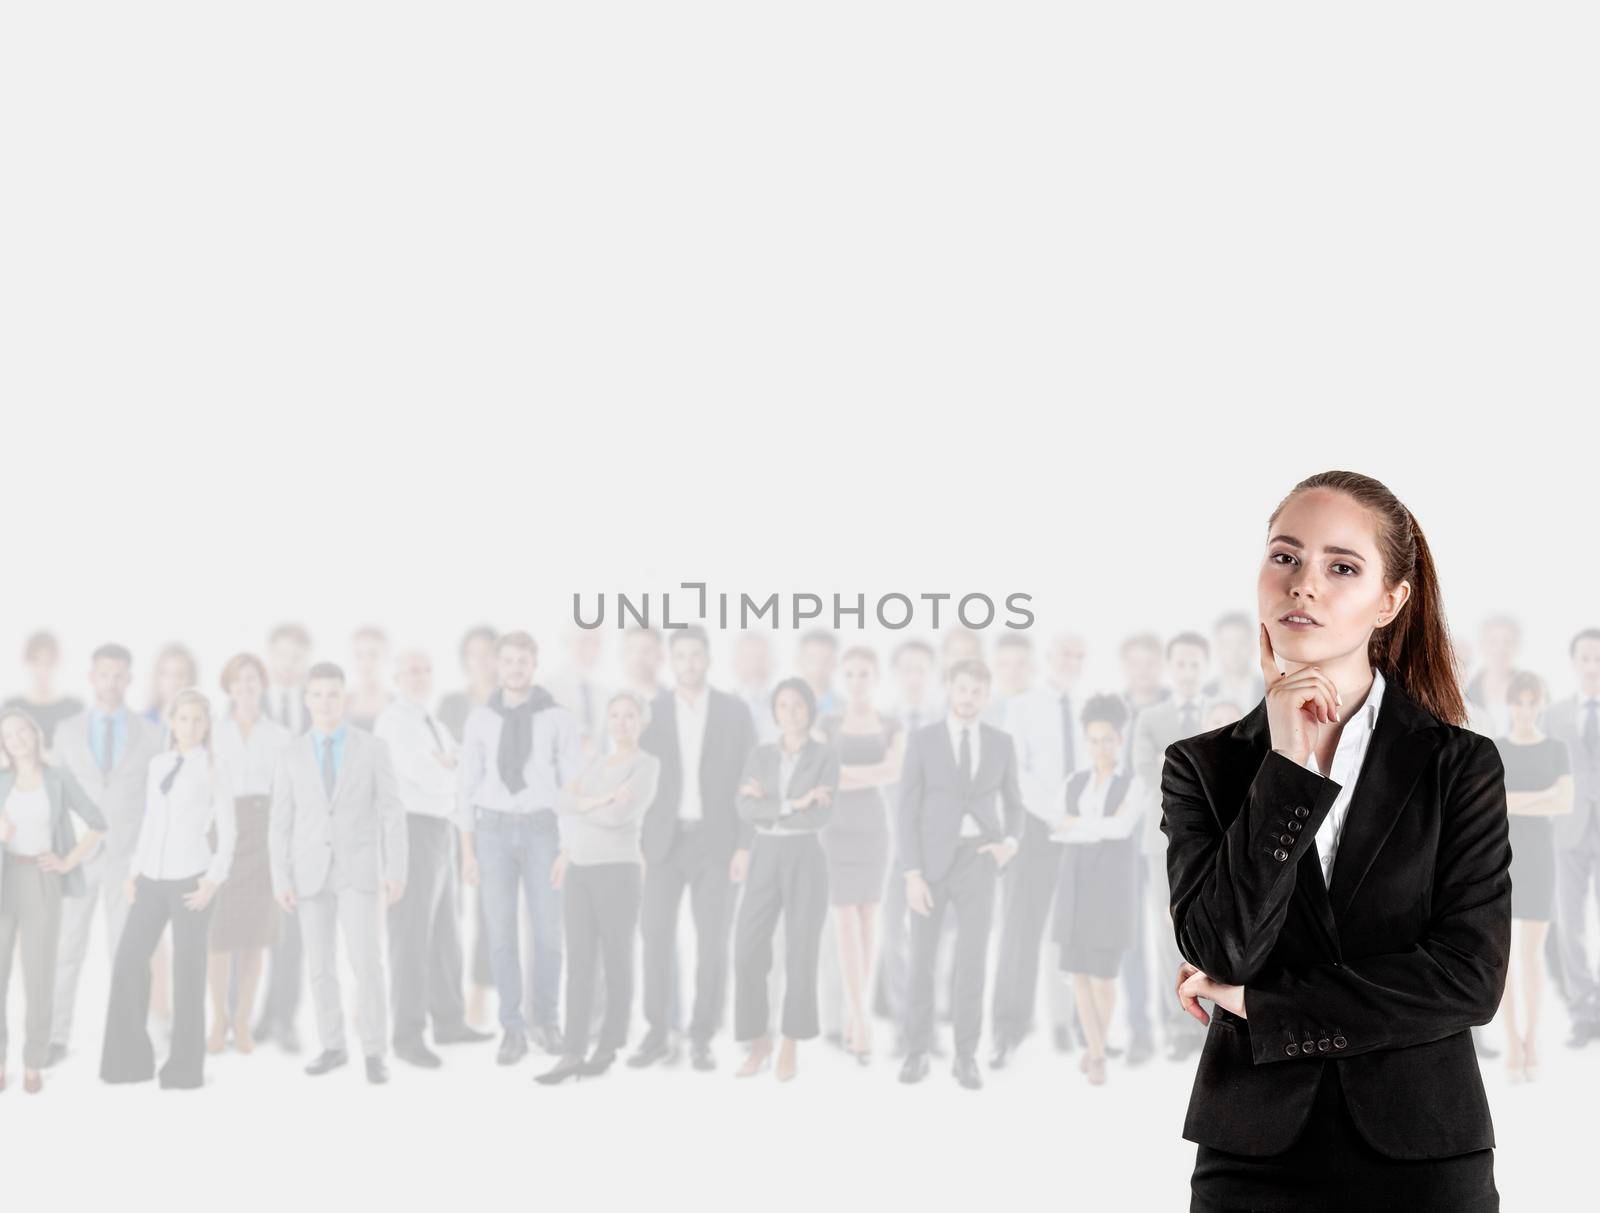 Business woman thinking with her team behind her - isolated over gray background